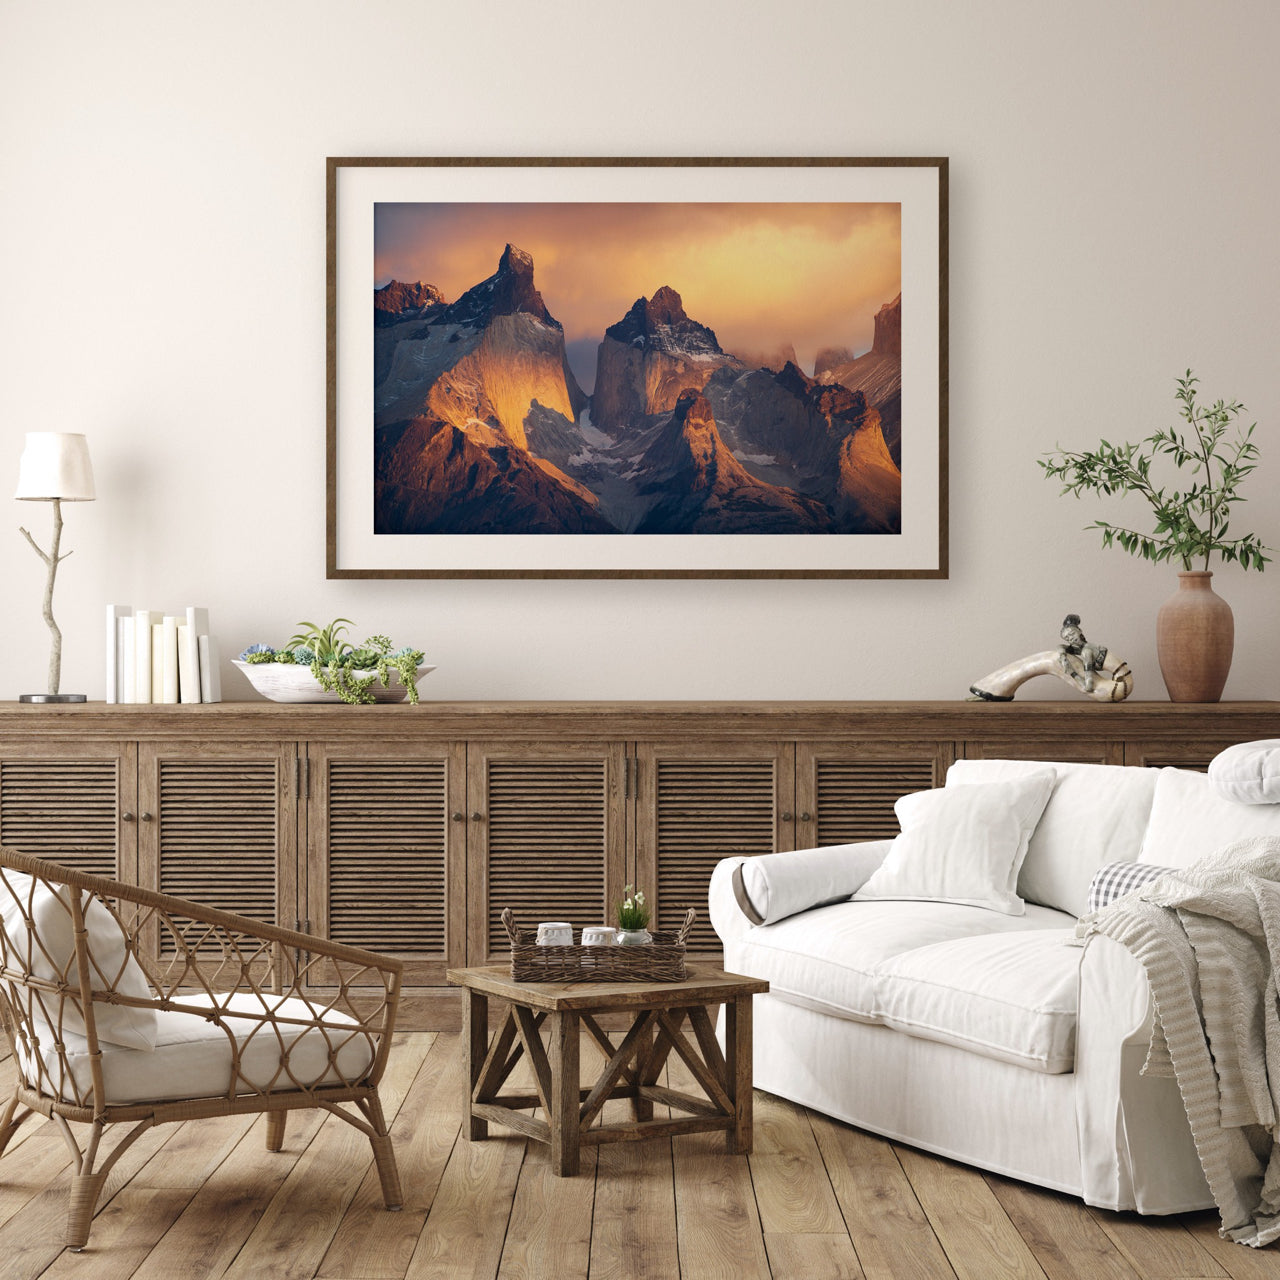 Framed mountain picture in living room